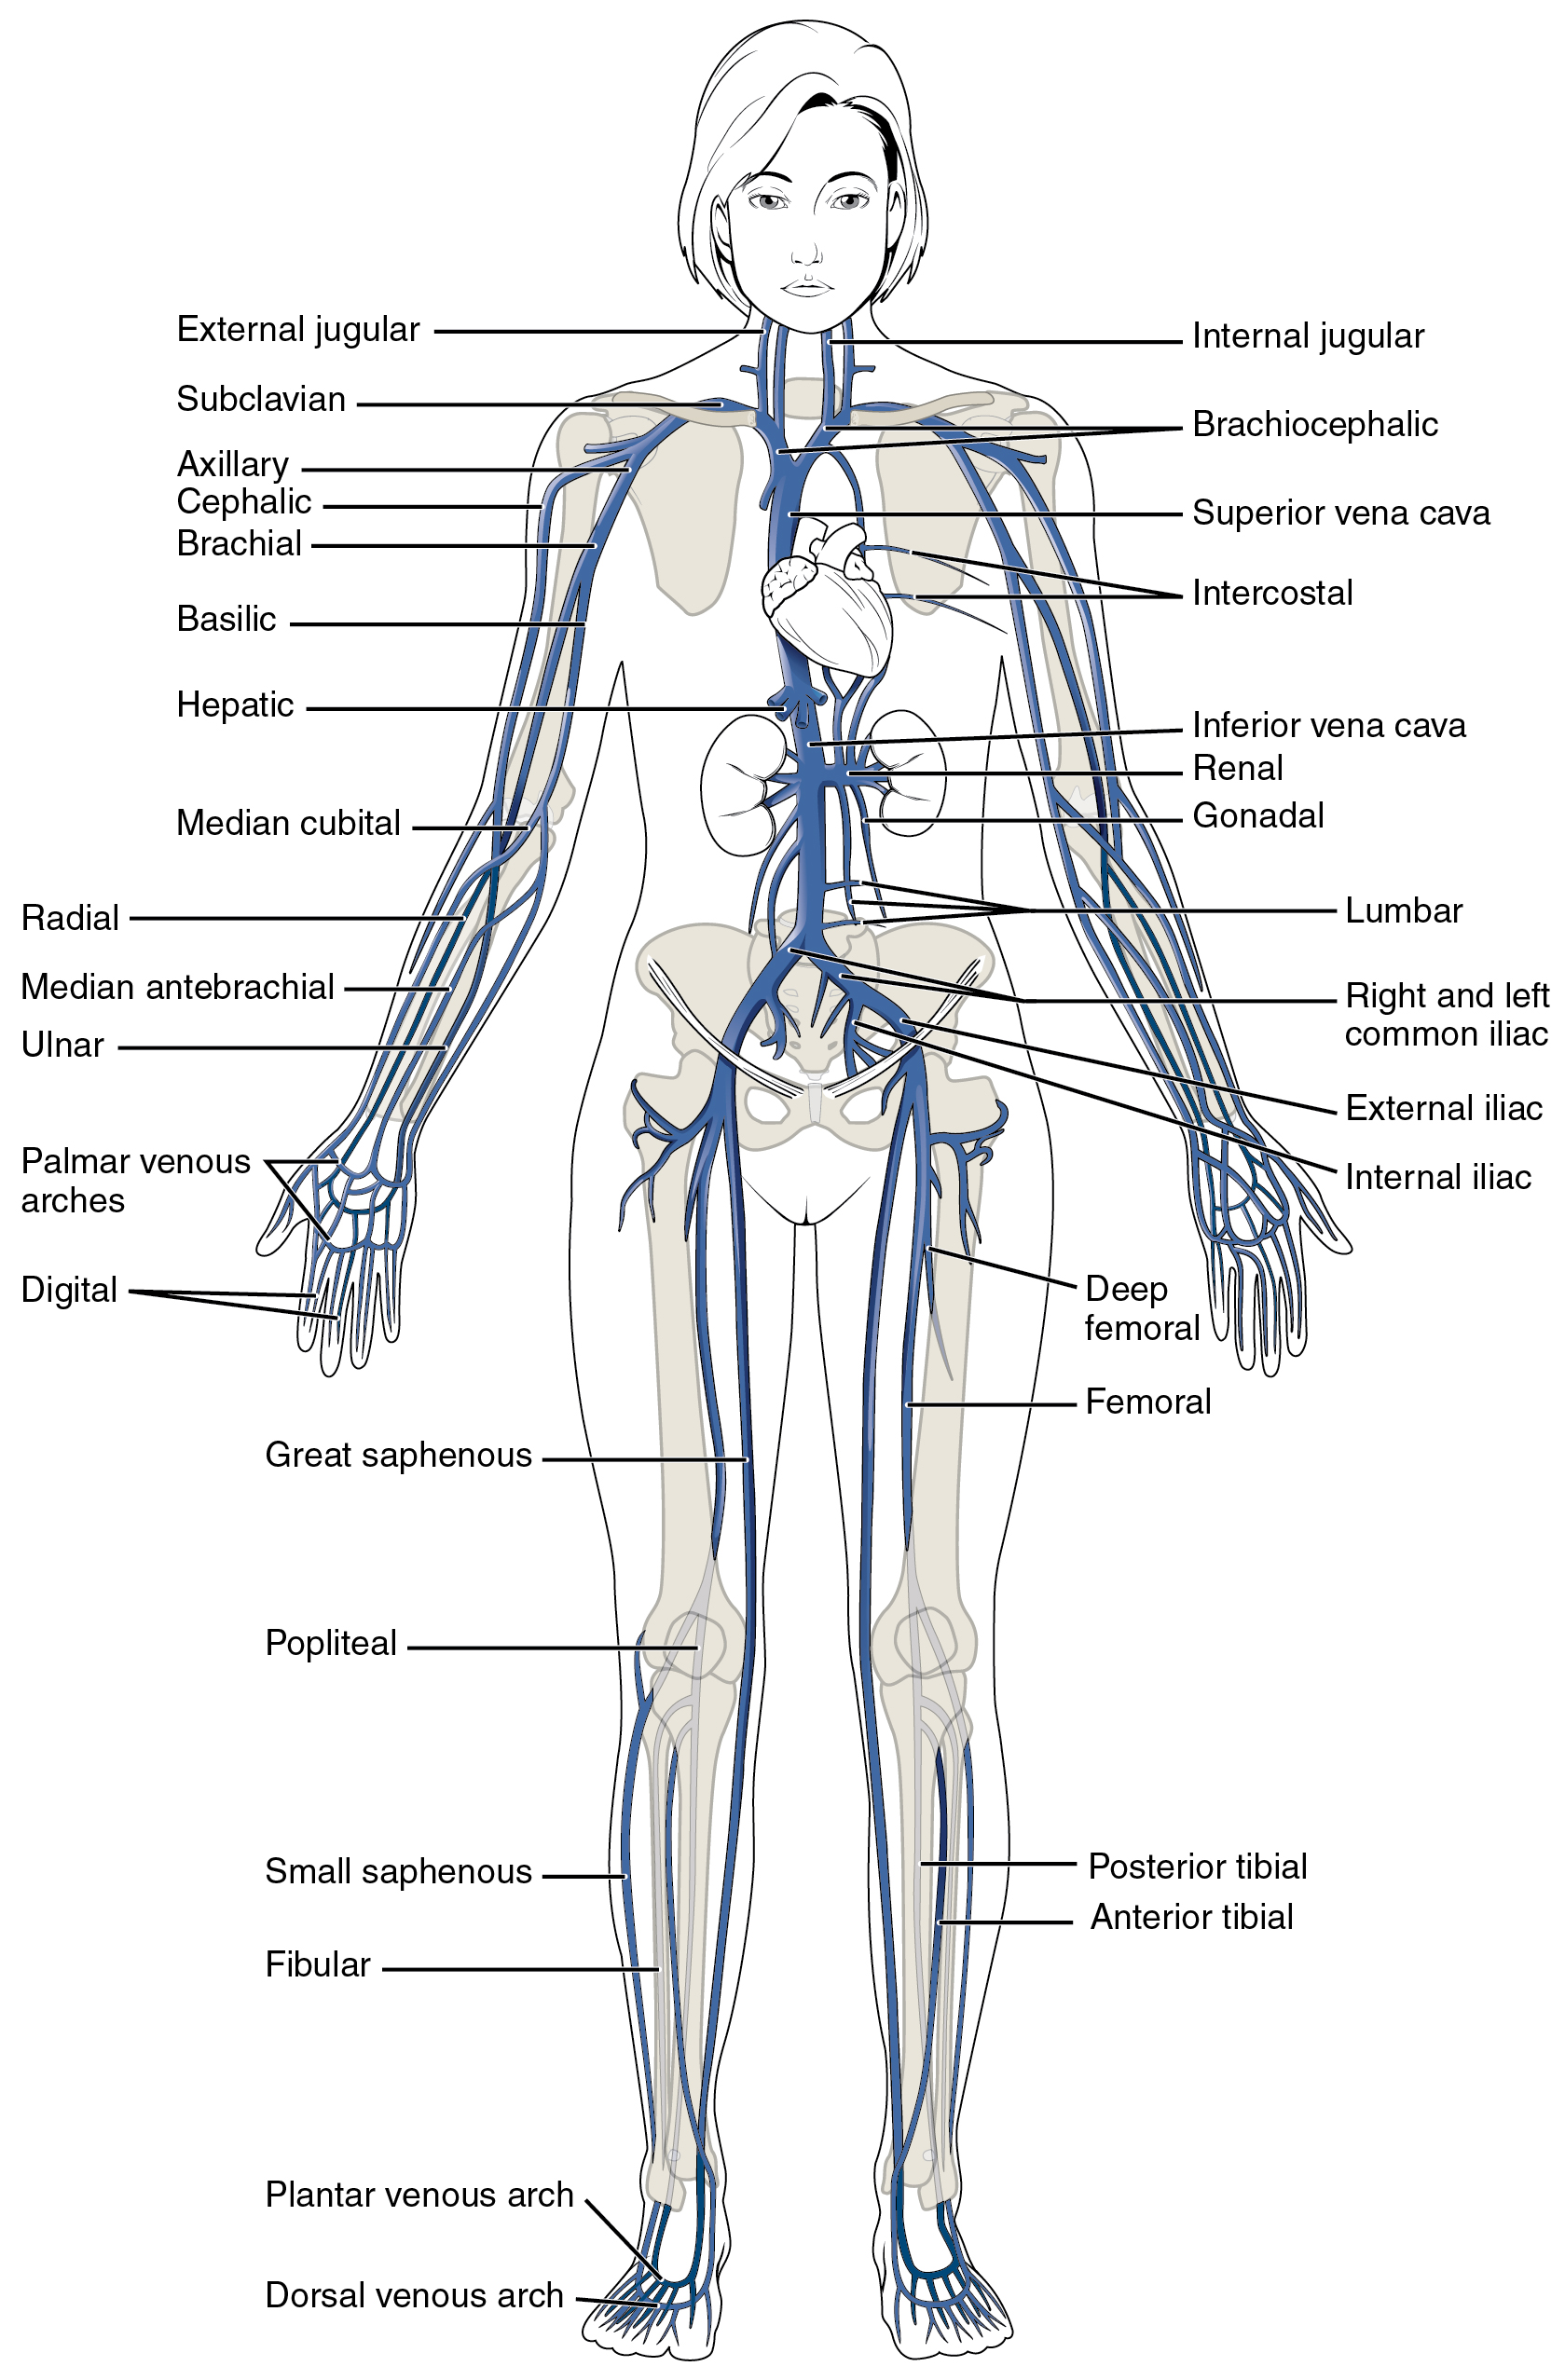 major systemic veins labeled